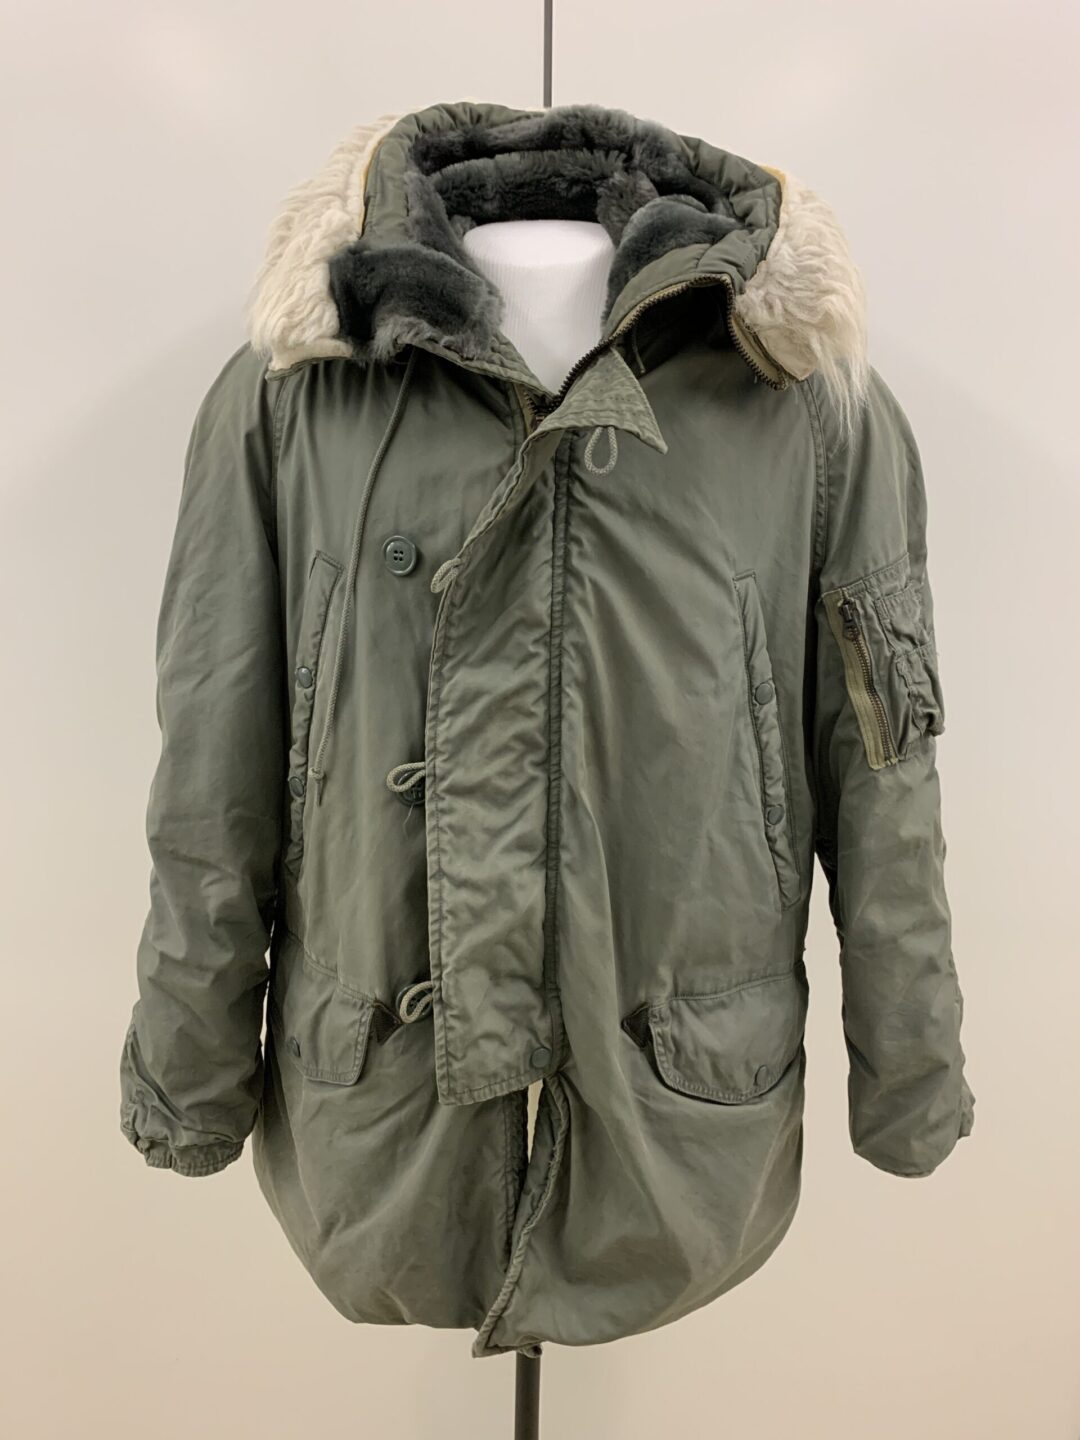 Parka Worn by Iran Hostage - The National Museum of American Diplomacy